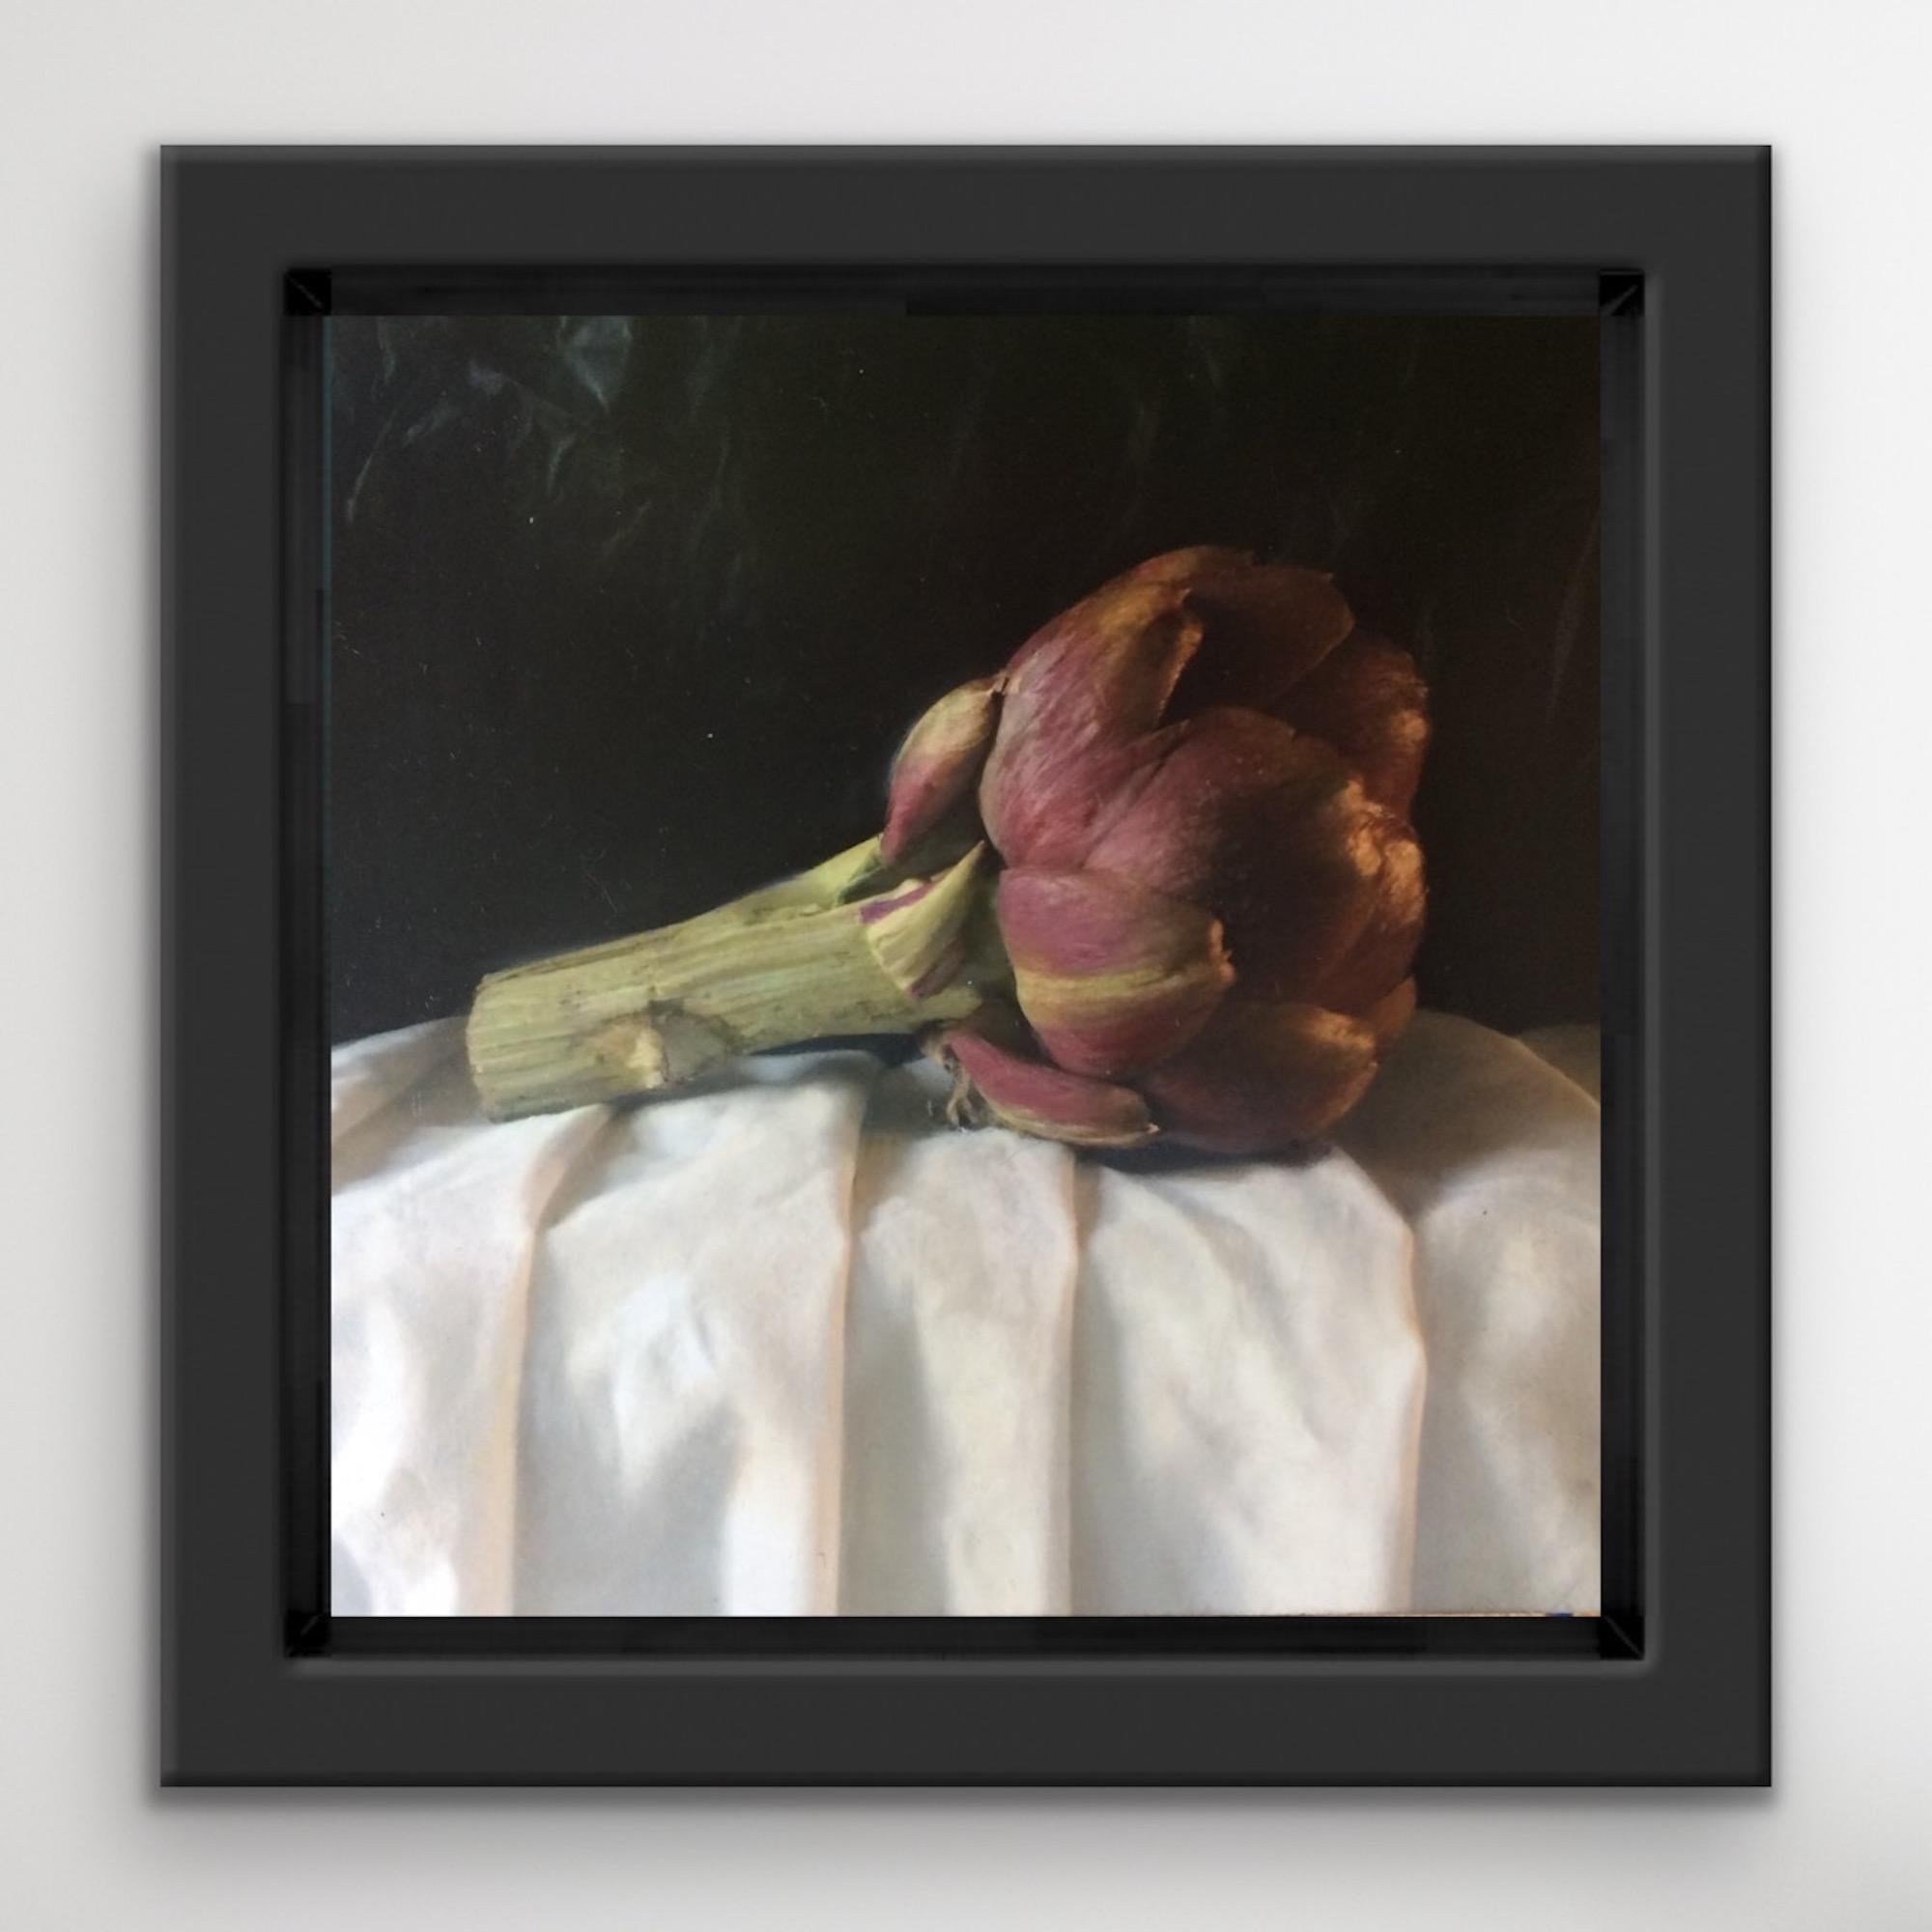 Artichoke is an original oil painting by Kate Verrion. Kate’s photographic style gives her work an intricacy rarely found. Oil Paint on Oil Paper on Wood Block, Liquin Varnish.
Kate Verrion is available online and in our gallery with Wychwood Art.